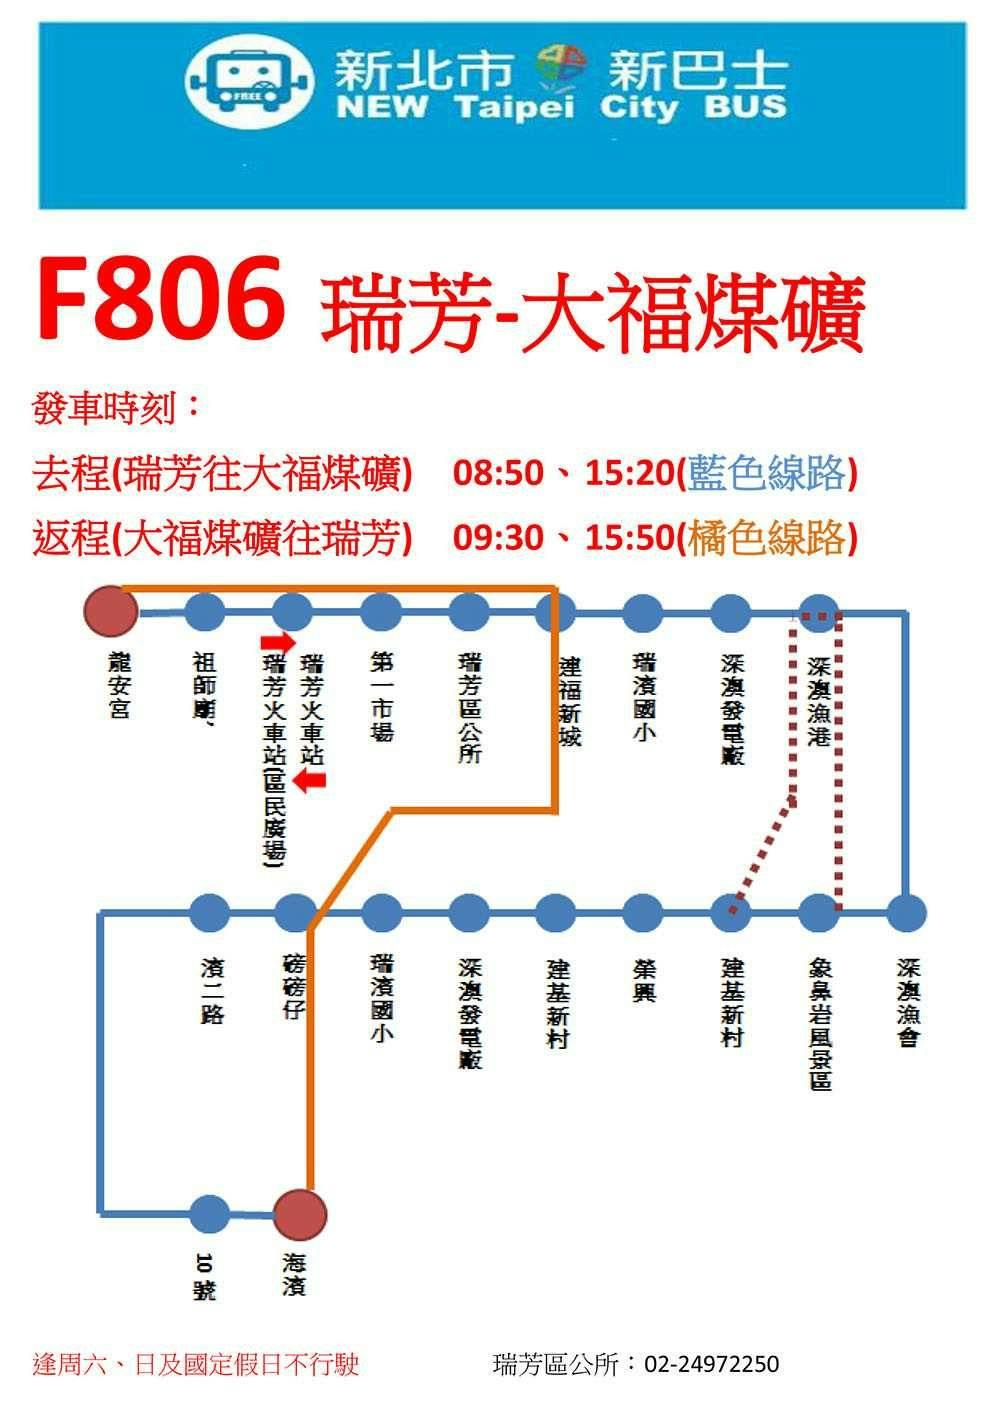 F806Route Map-新北市 Bus